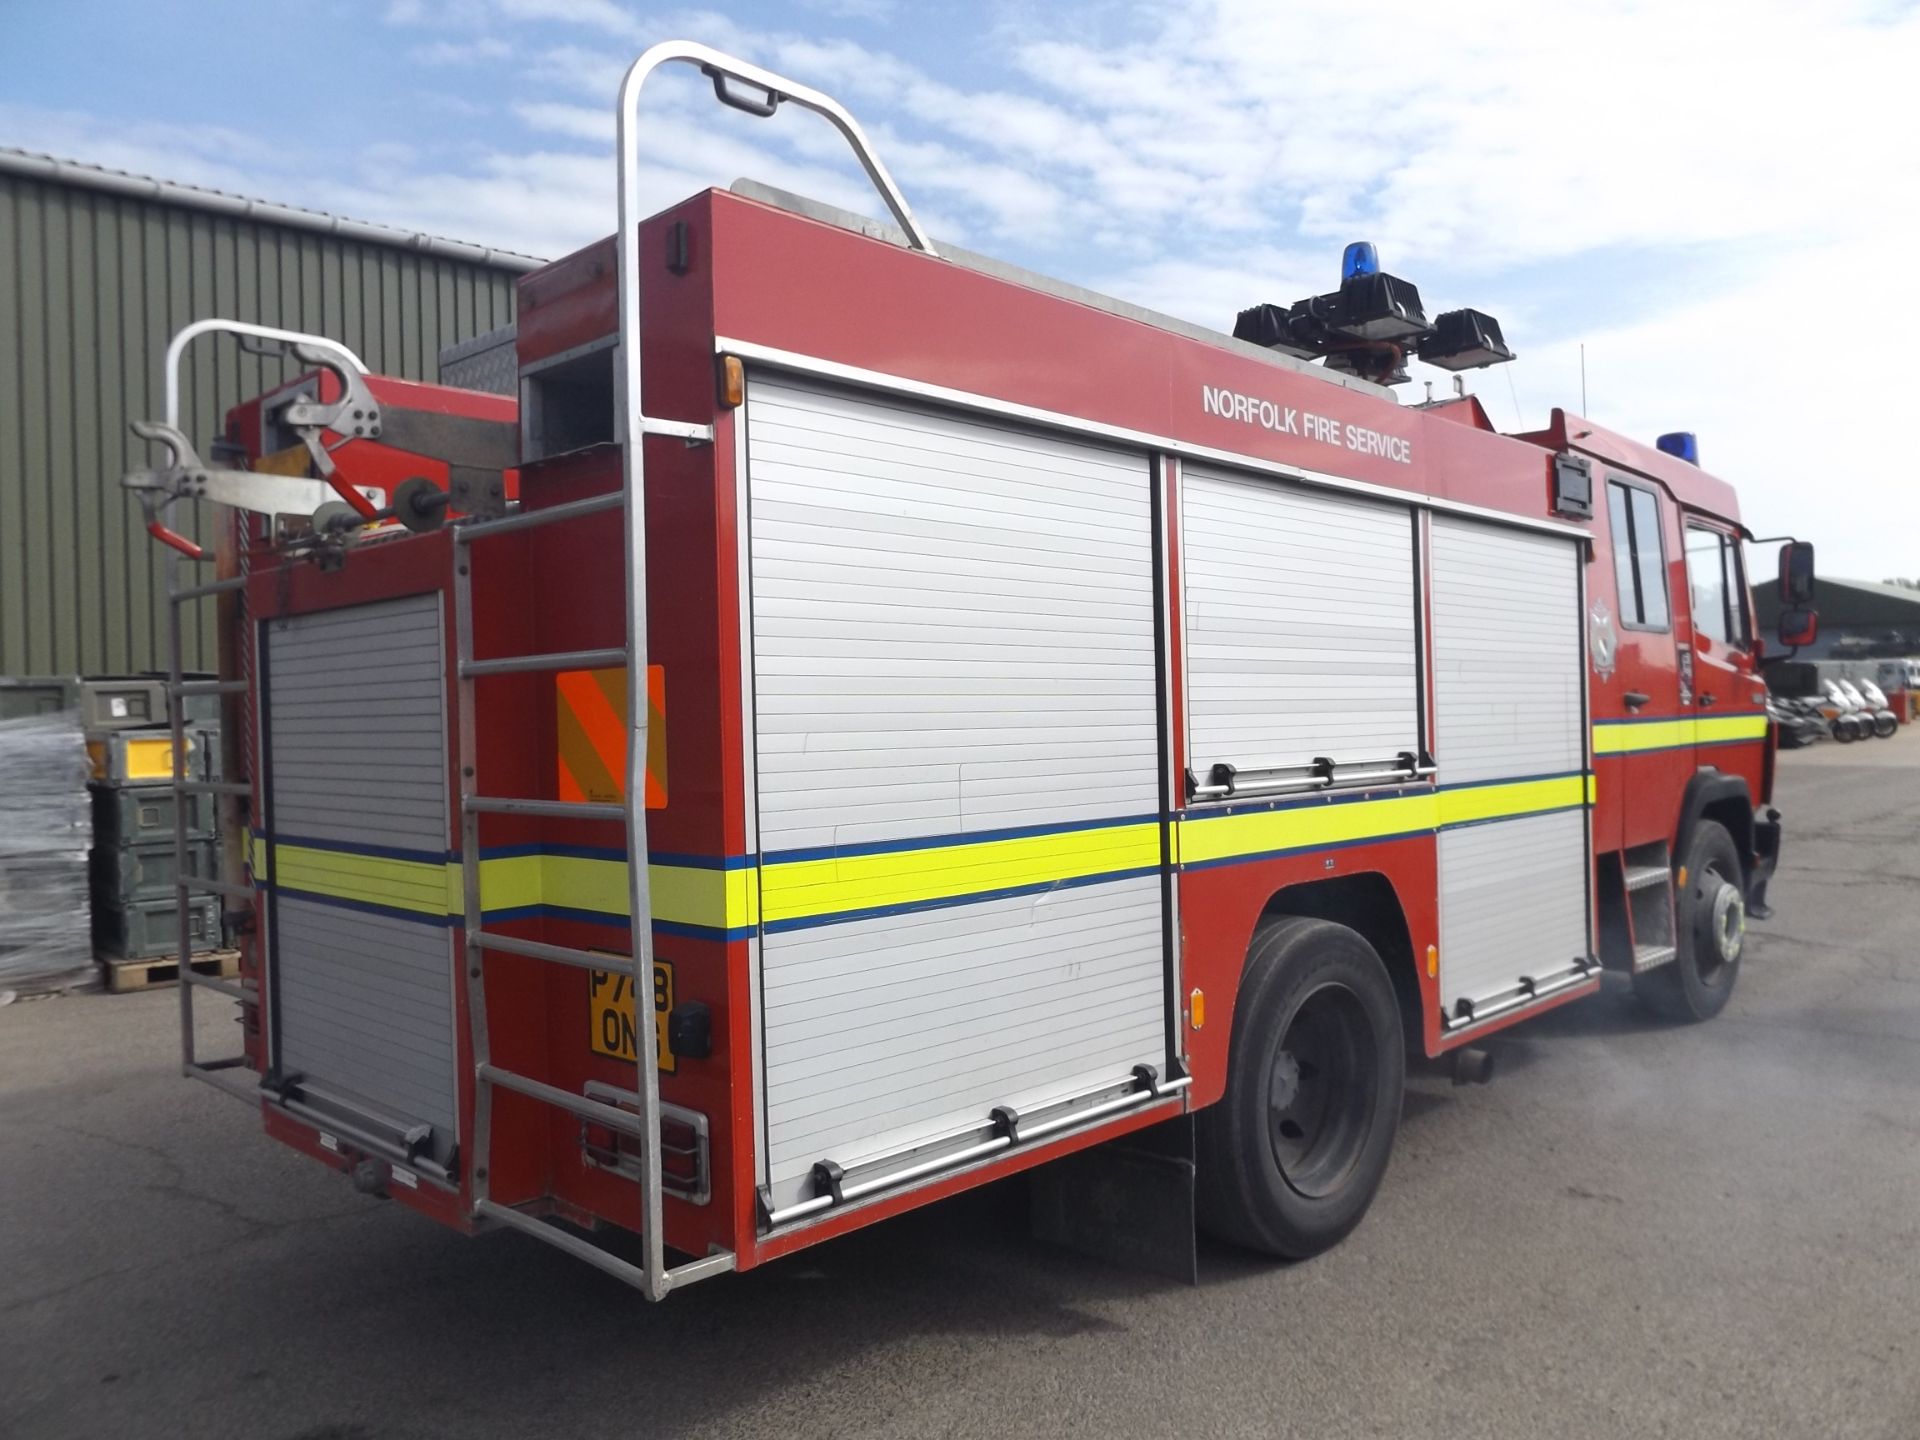 Mercedes 1124 Excaliber Fire Engine - Image 6 of 17